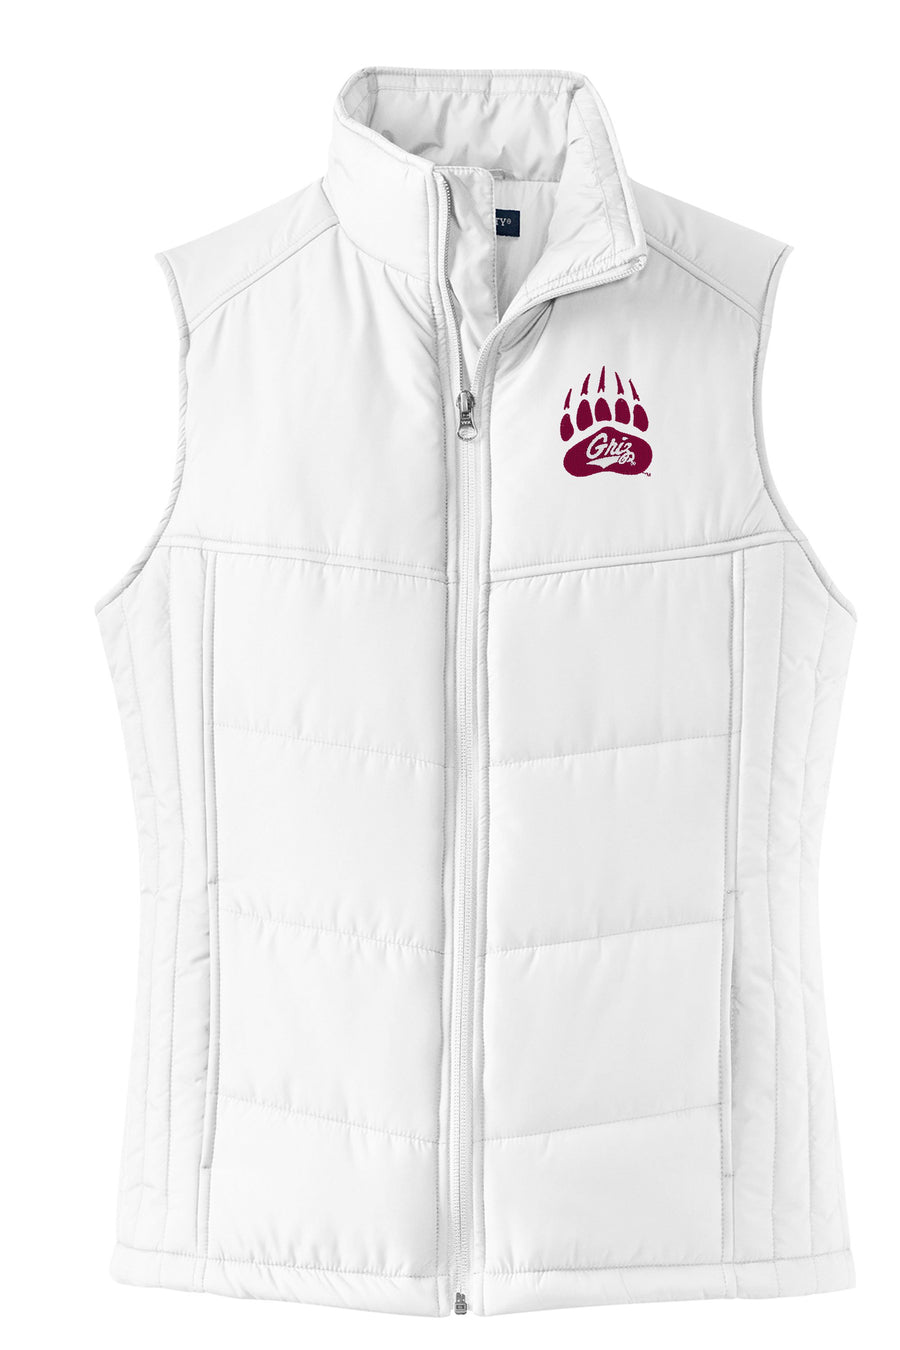 Blue Peak Creative's white Ladies' Puffy Vest with an embroidered Griz Script and Bear Paw in maroon and white